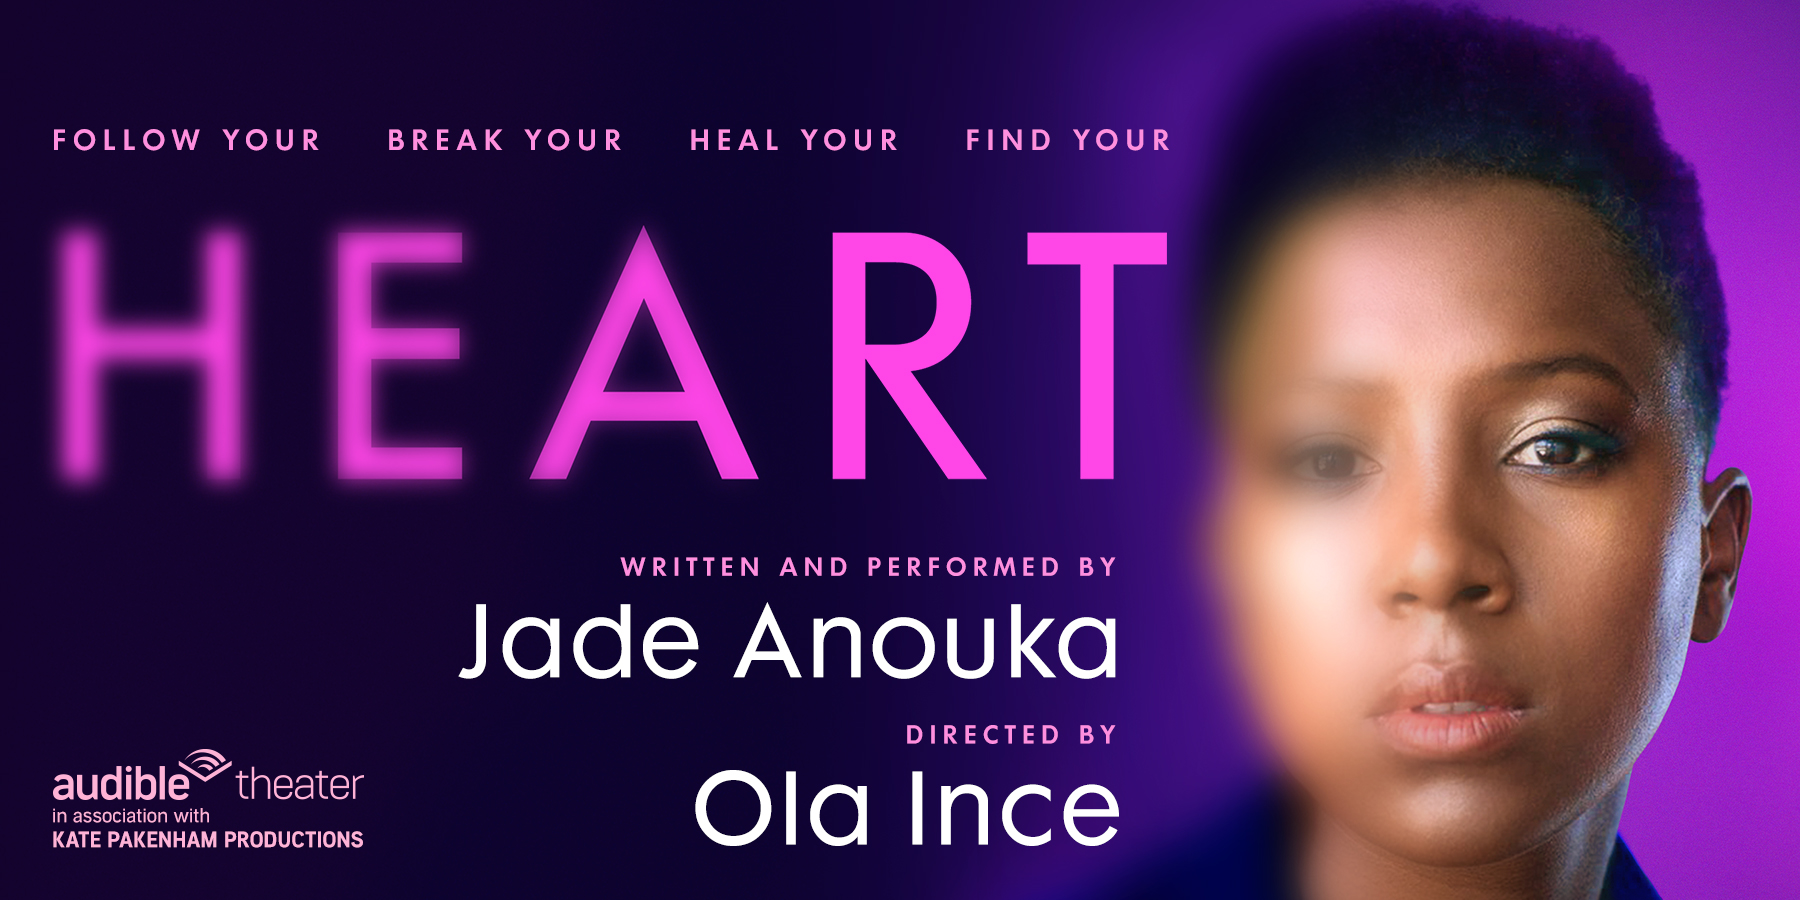 HEART Written and Performed by Jade Anouka